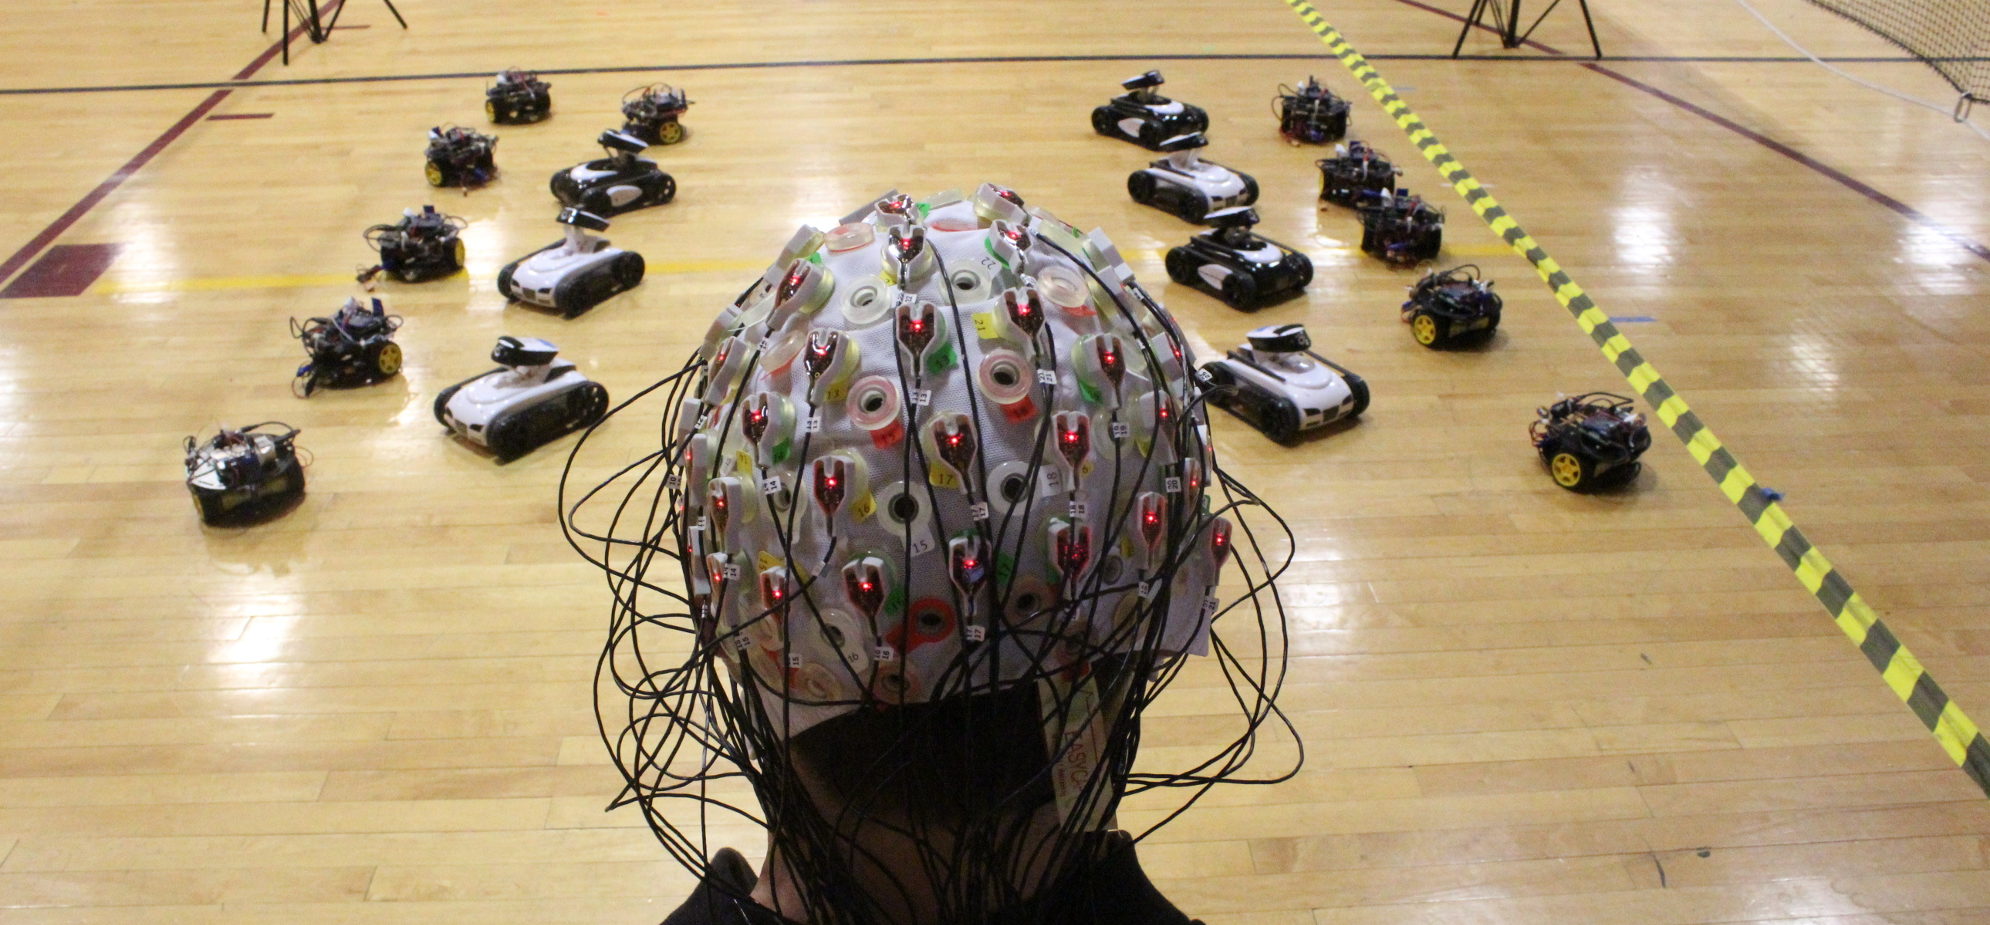 Wheeled robots on a gym floor in front of a person wearing a cap with wires and electrodes on it